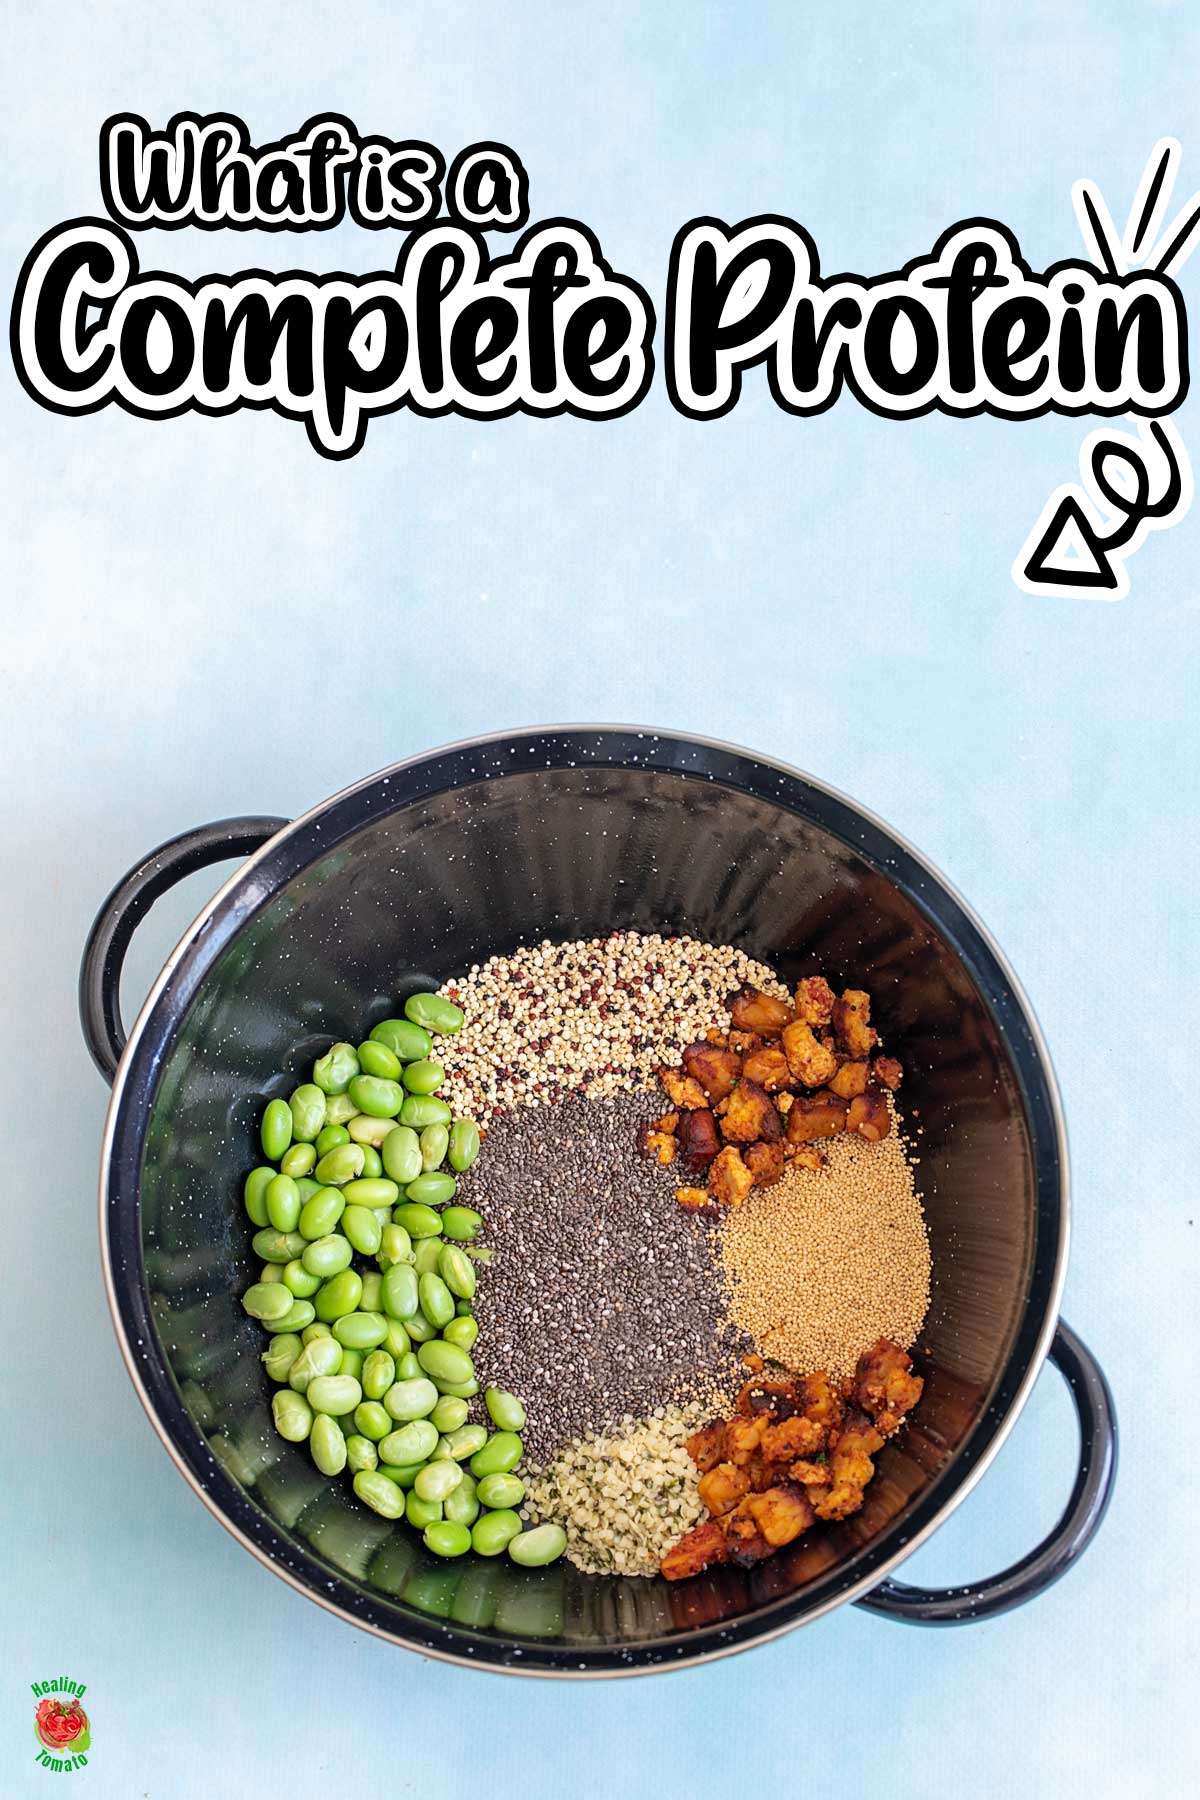 Top view of a black wok filled with edamame, chia seeds, hemp seeds, quinoa, amaranth and tofu crumbles. Complete protein sources.